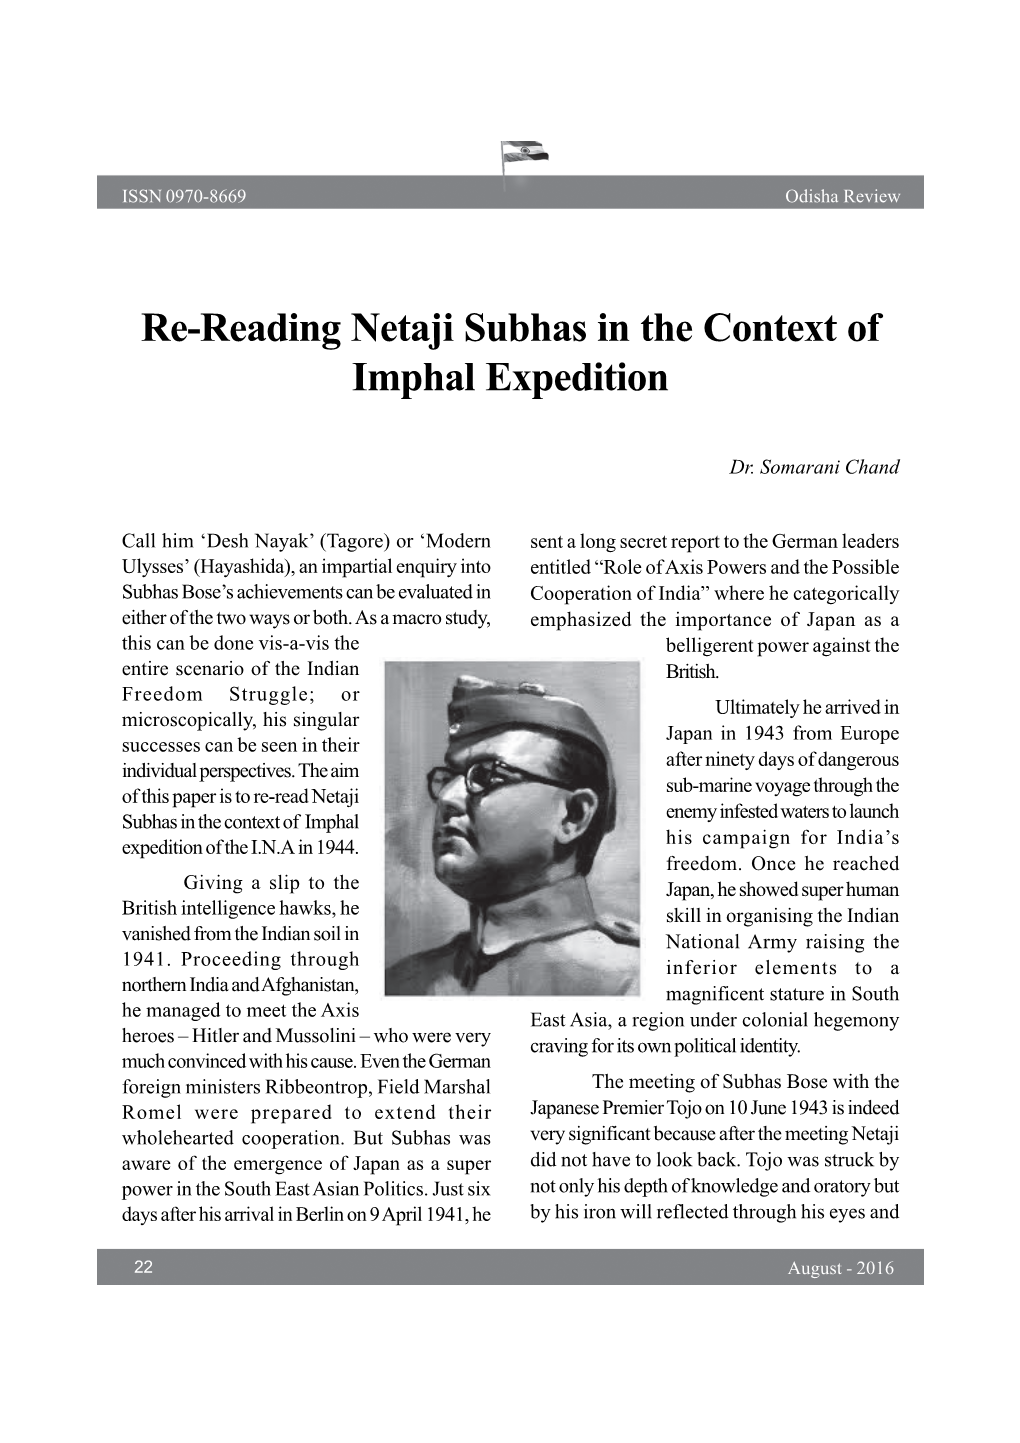 Re-Reading Netaji Subhas in the Context of Imphal Expedition